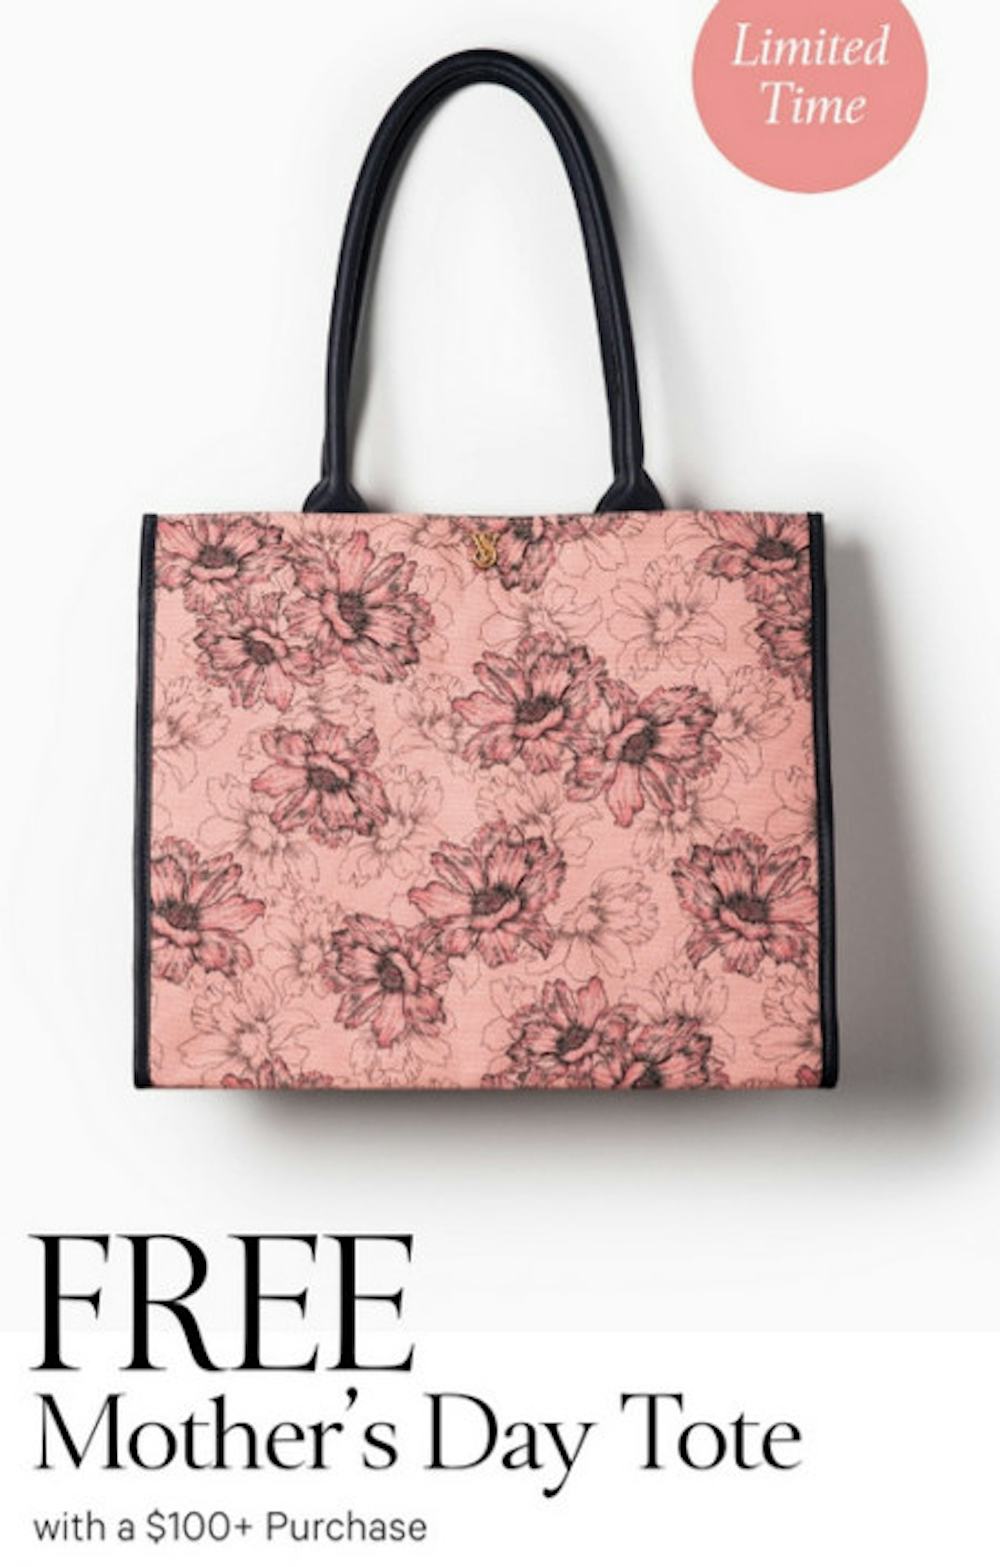 Free Mother's Day Tote